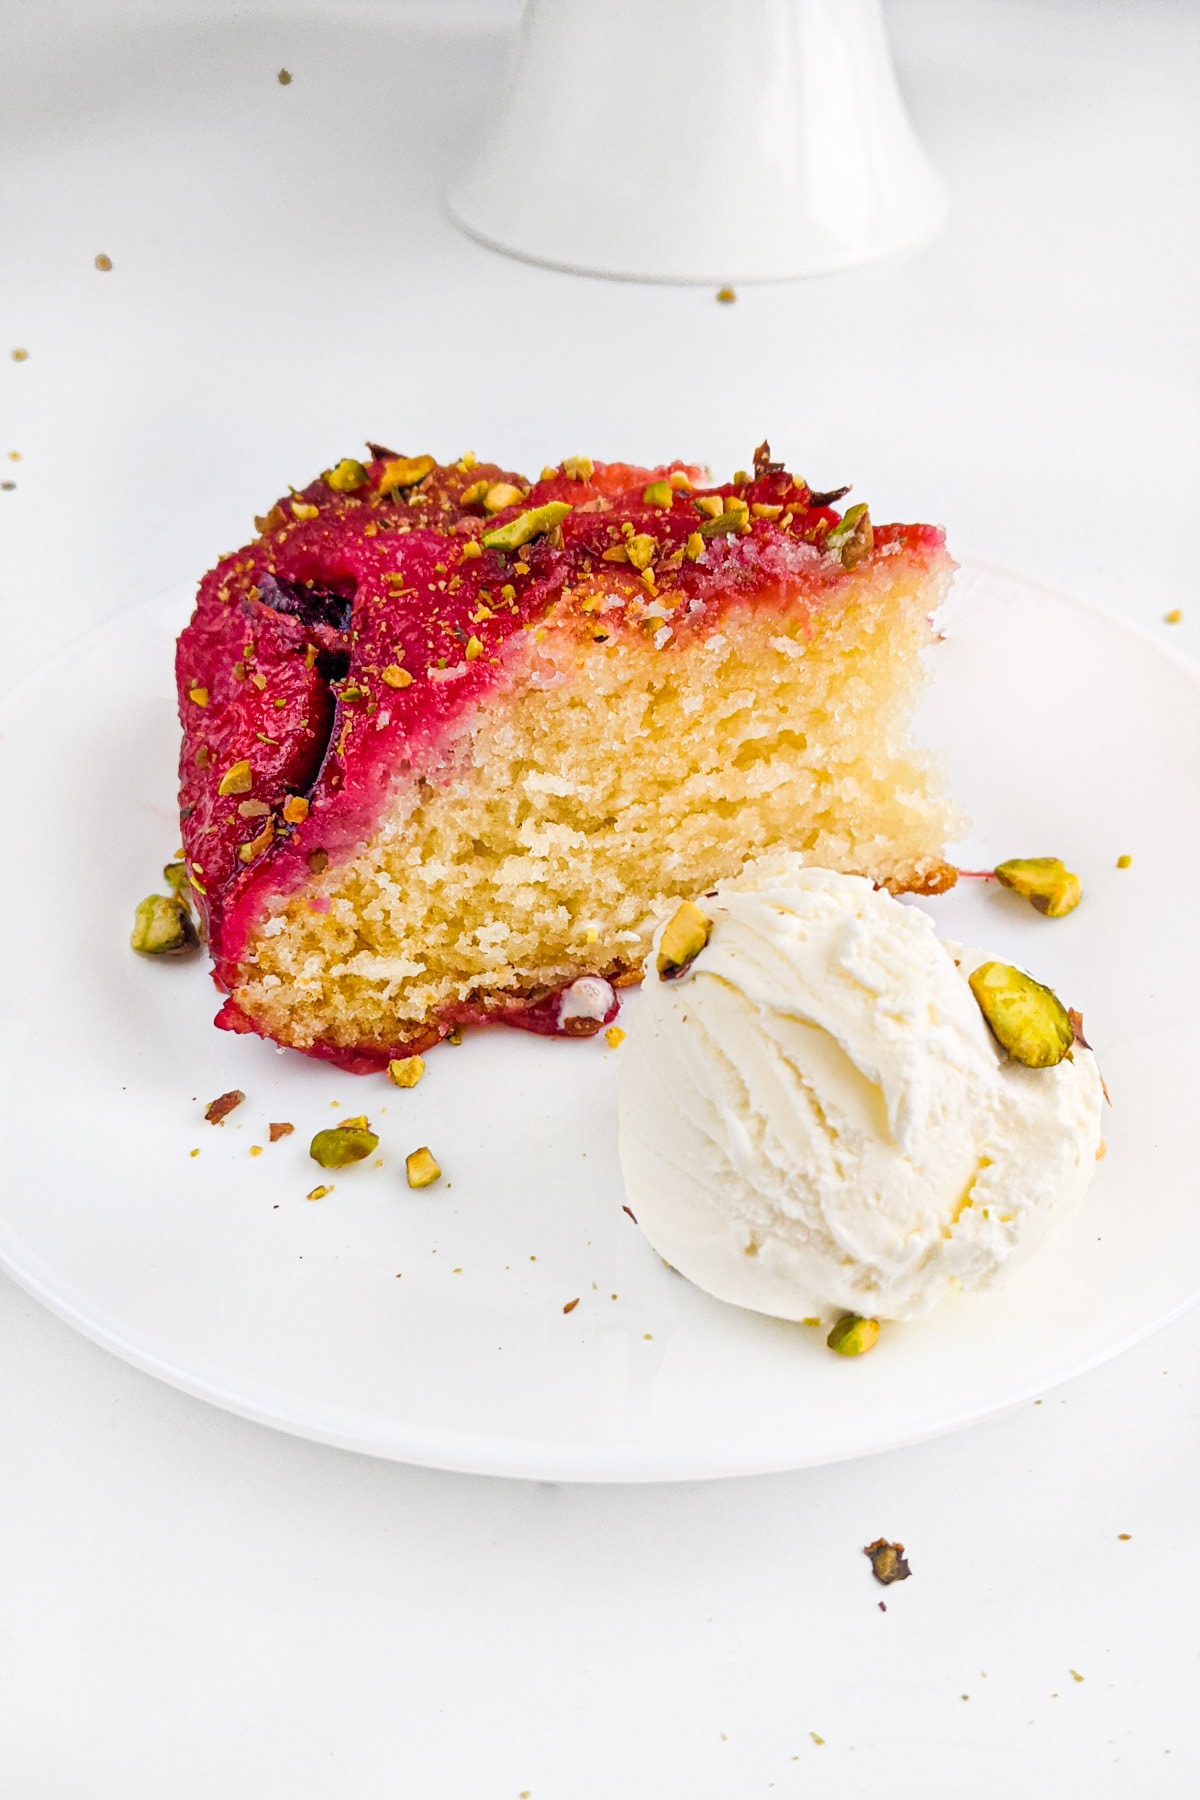 Slice of yogurt plum cake with crushed pistachios and ice cream ball on a white plate.